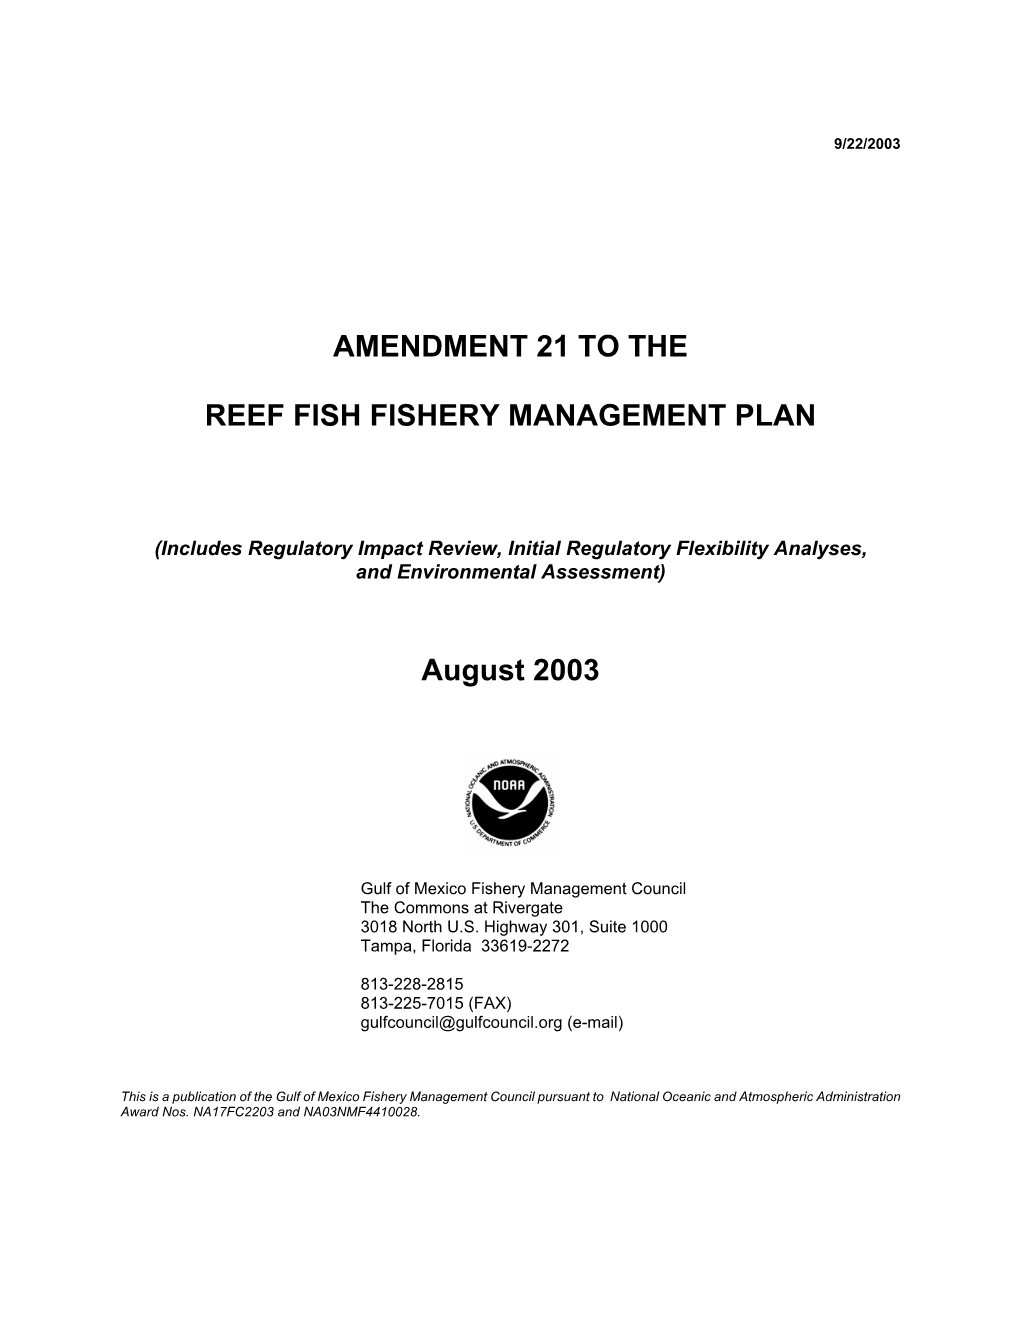 Reef Fish Amendment 21 to Continue the Madison/Swanson & Steamboat Lumps Reserves